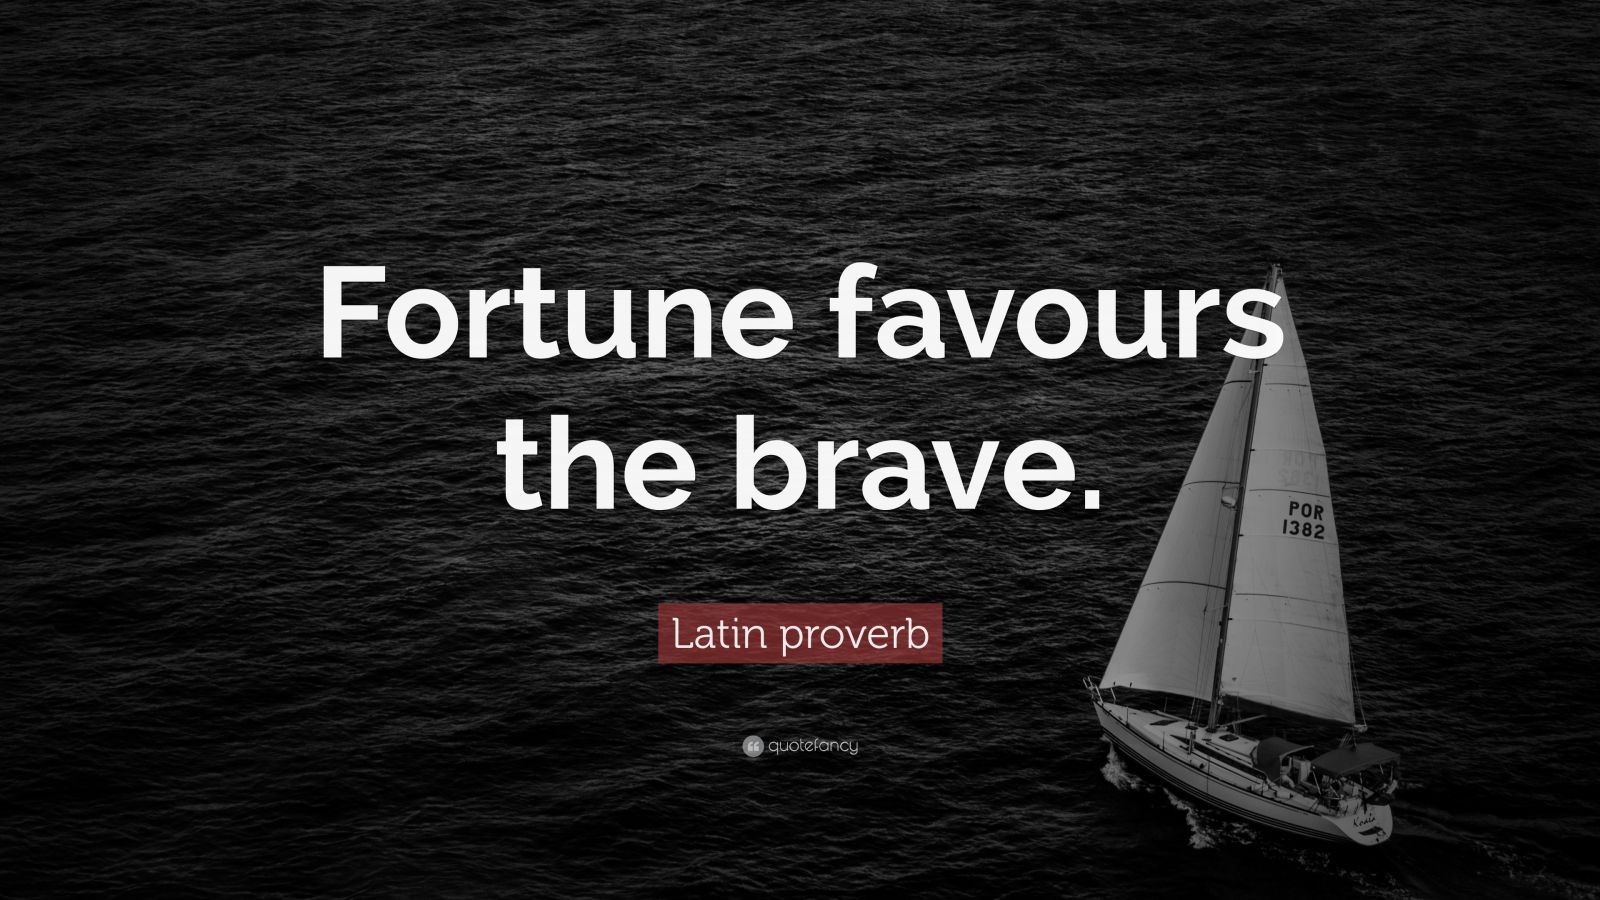 Latin proverb Quote: "Fortune favours the brave." (10 ...